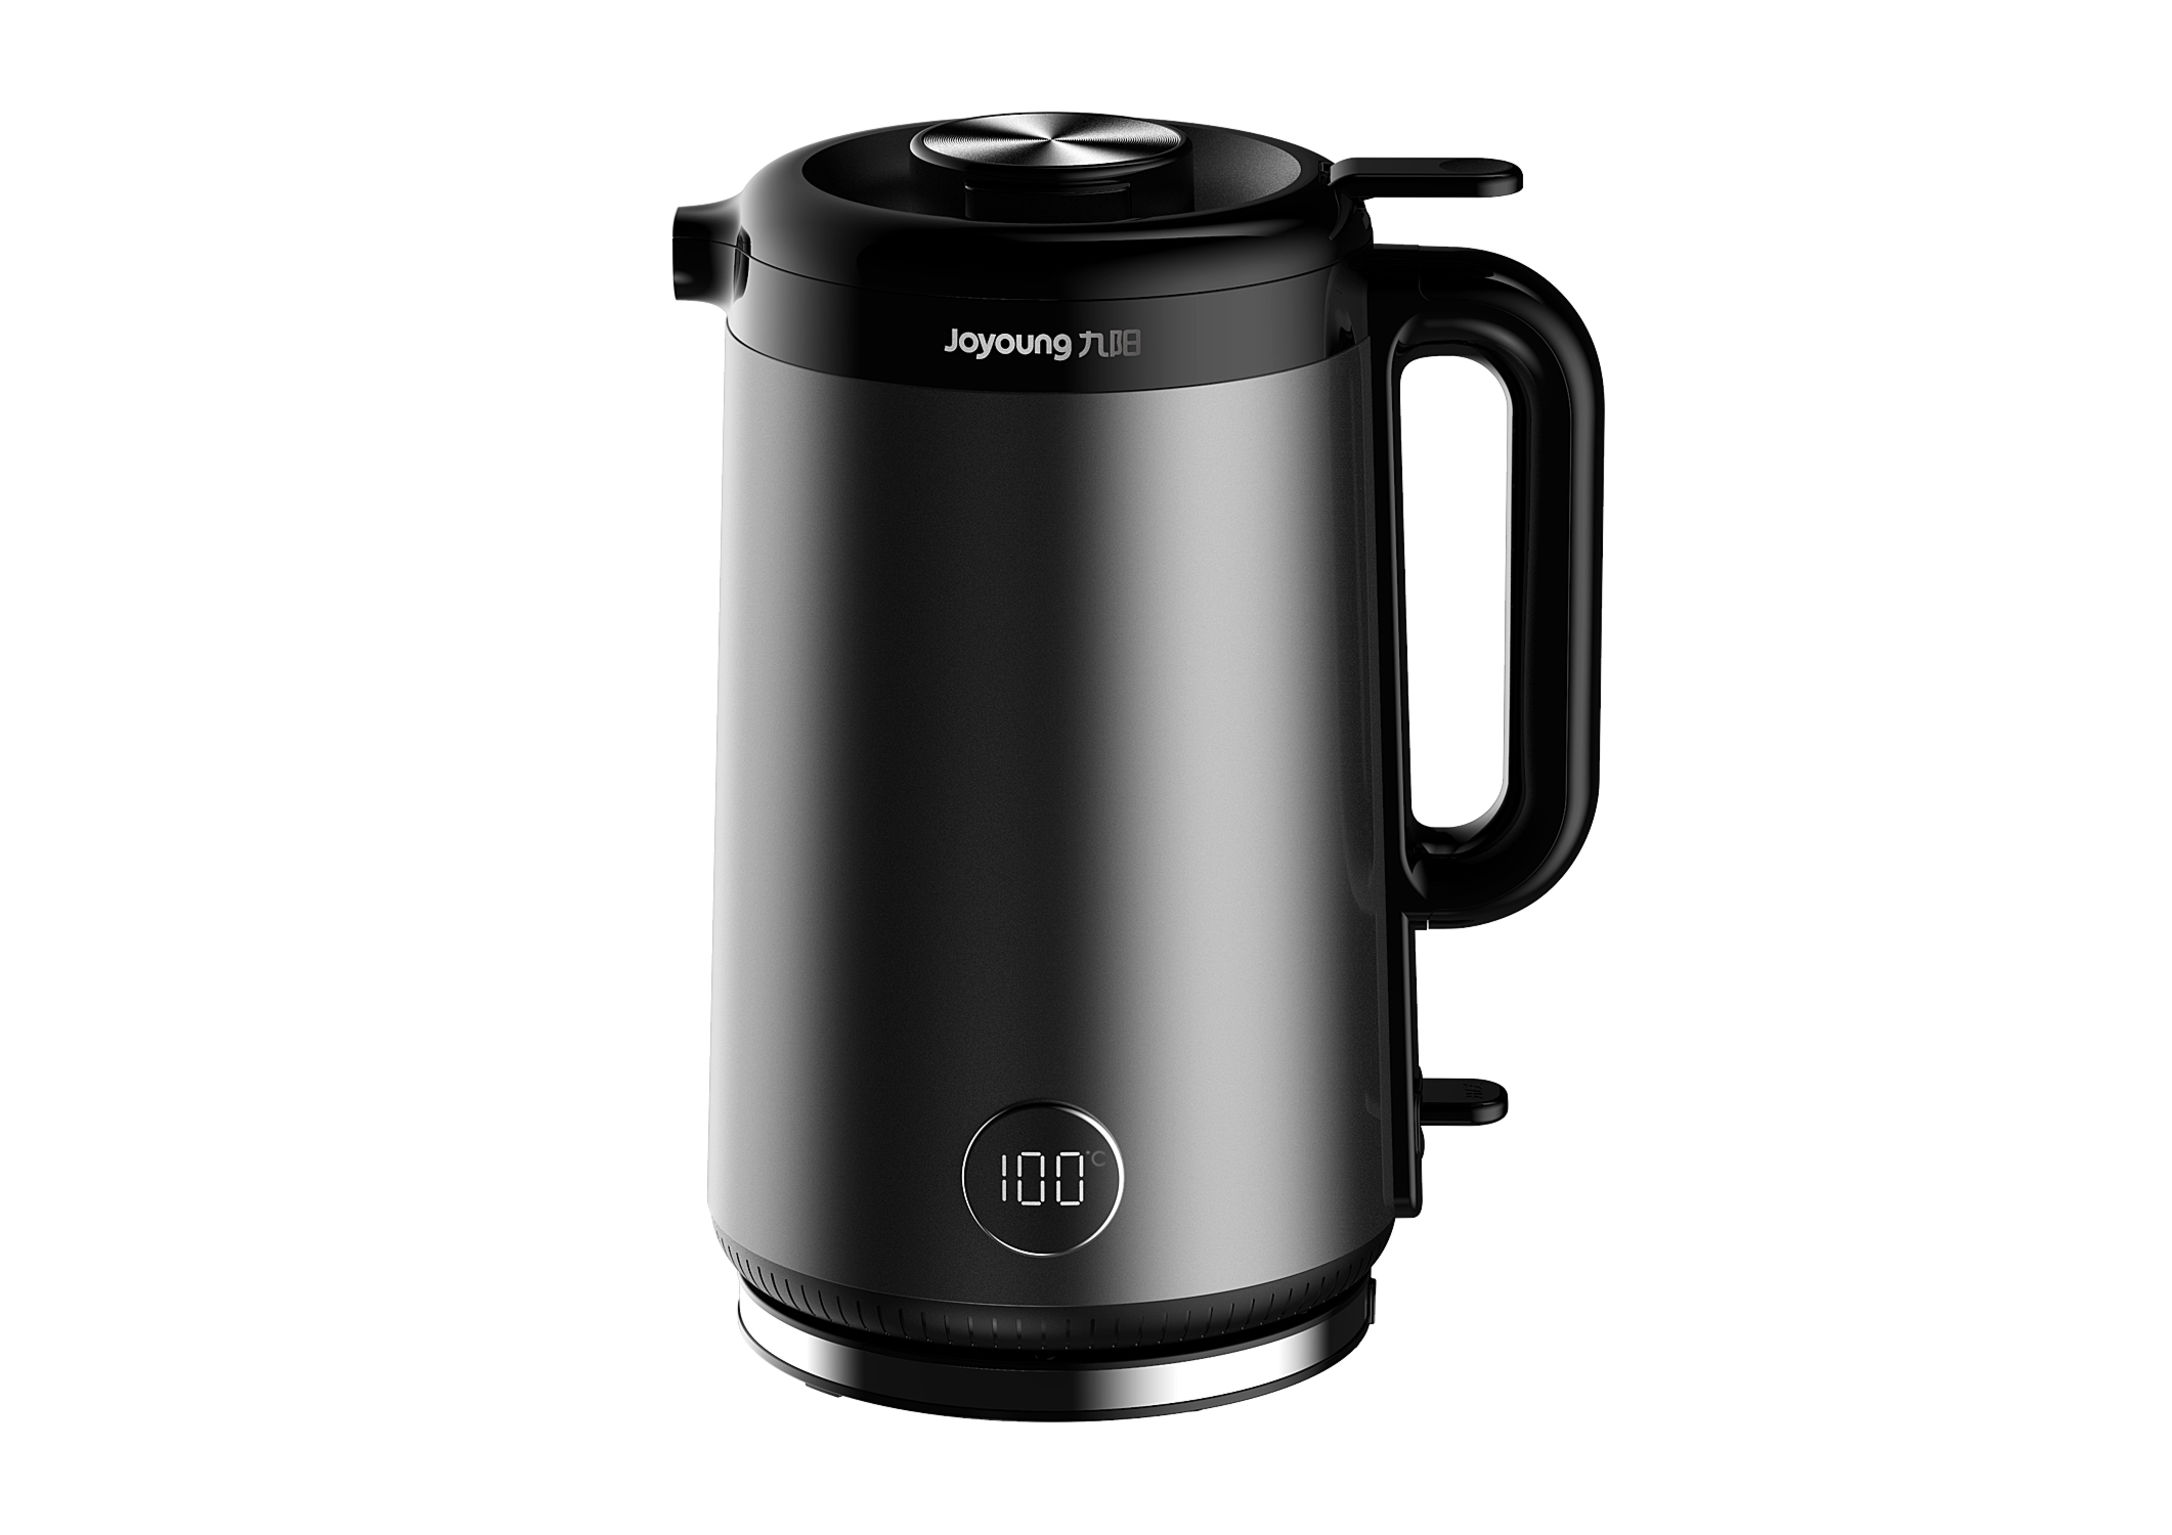 Physical insulated electric kettle W970